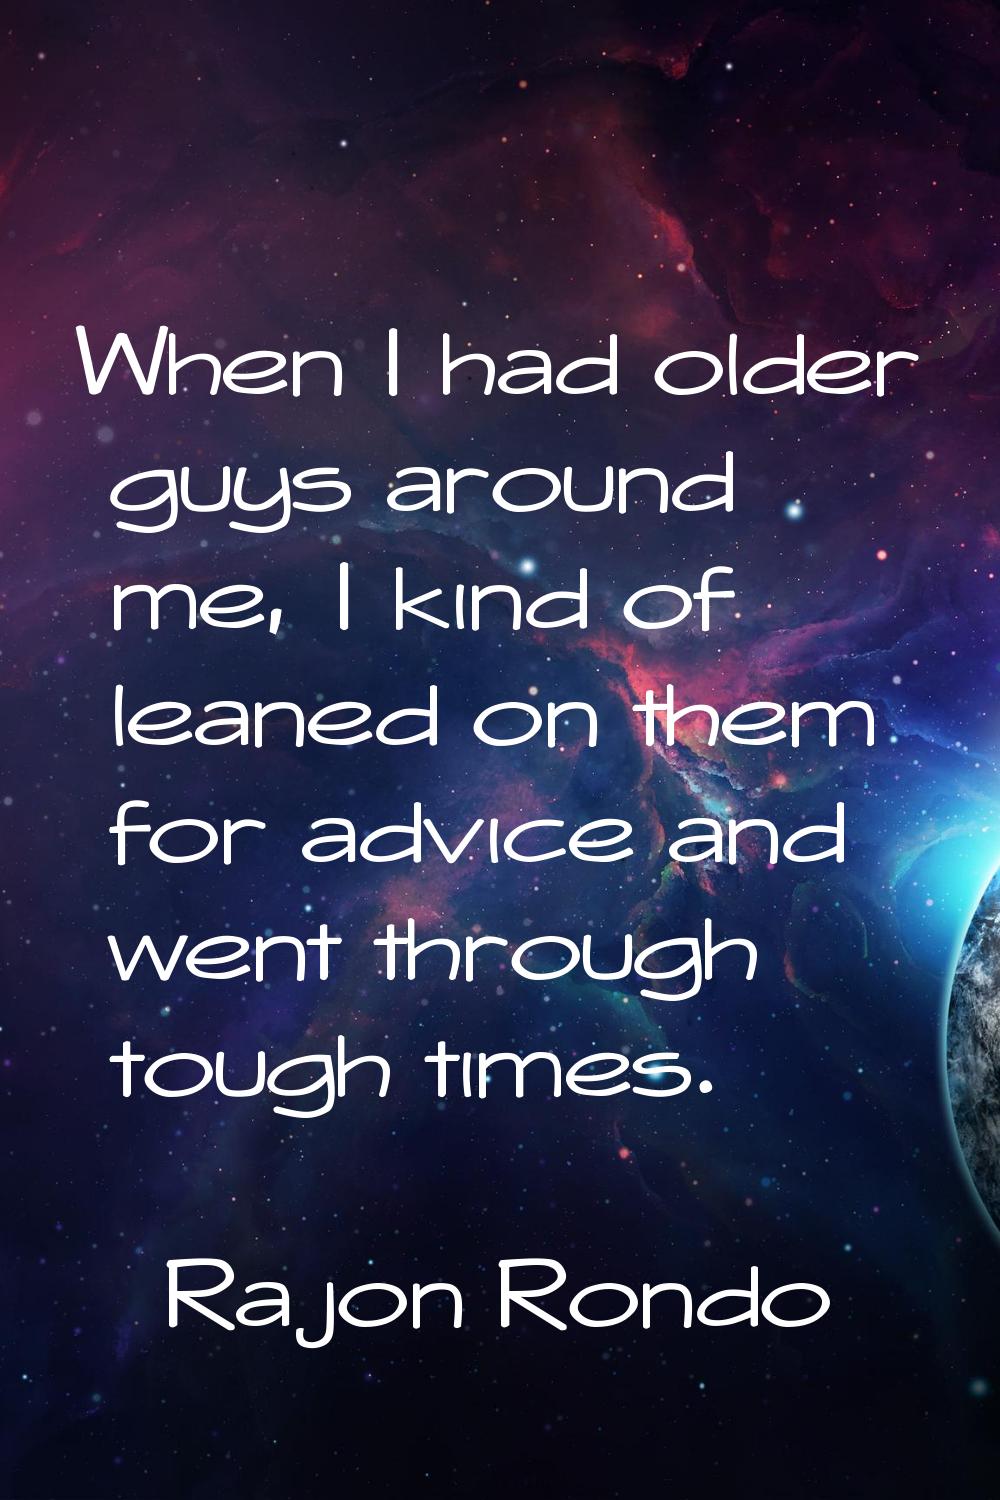 When I had older guys around me, I kind of leaned on them for advice and went through tough times.